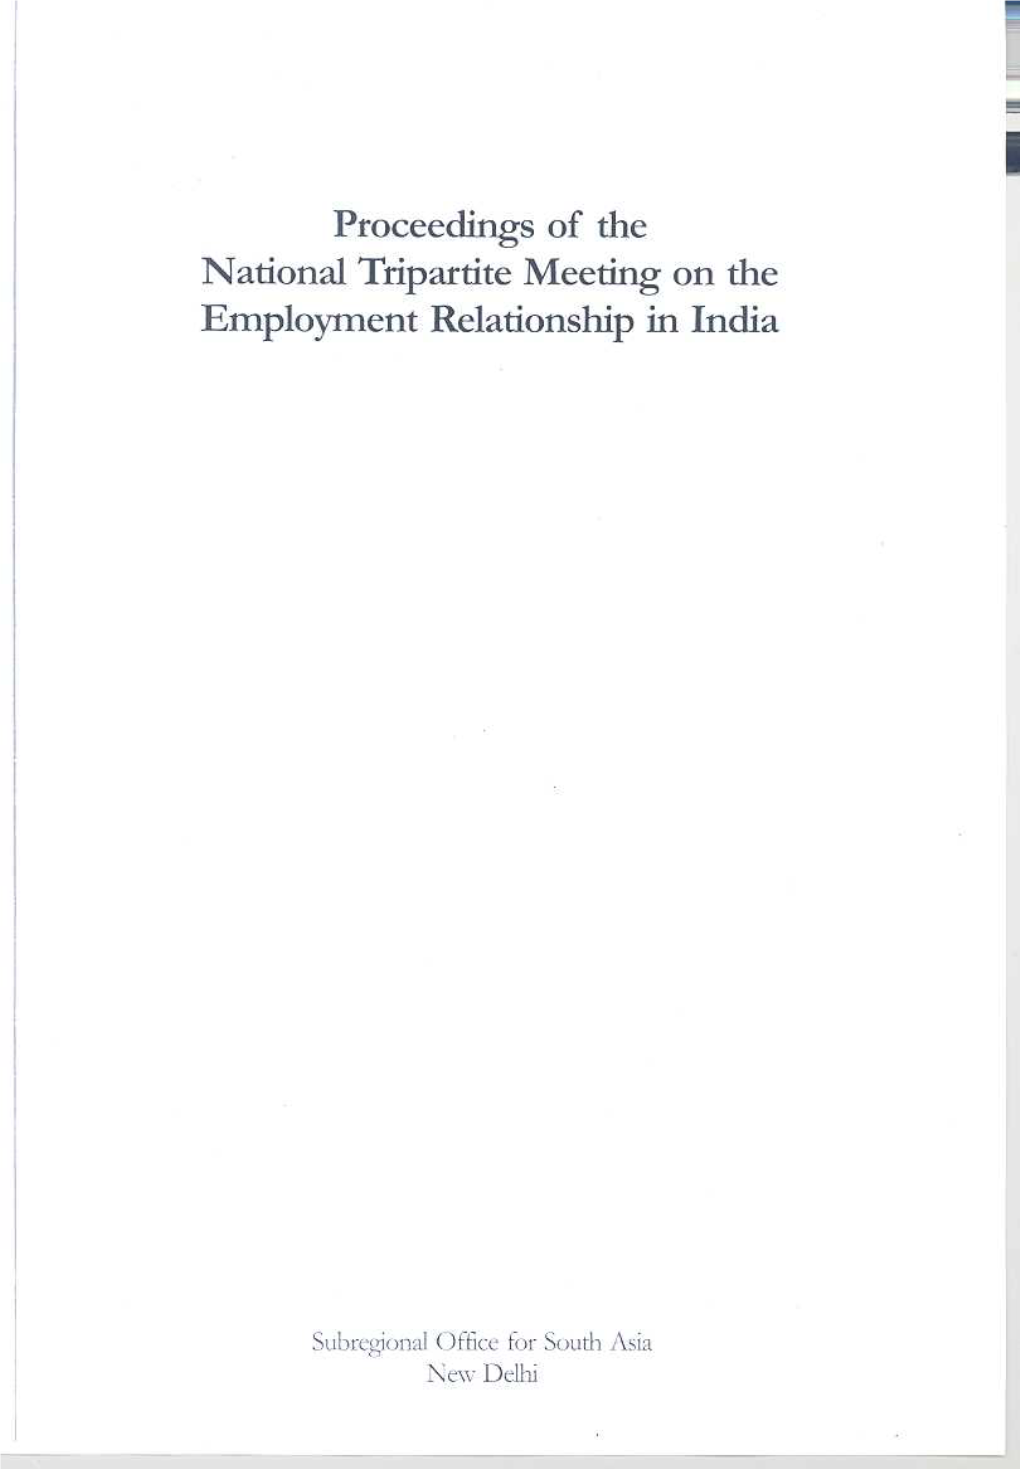 National Tripartite Meeting on the Employment Relationship In